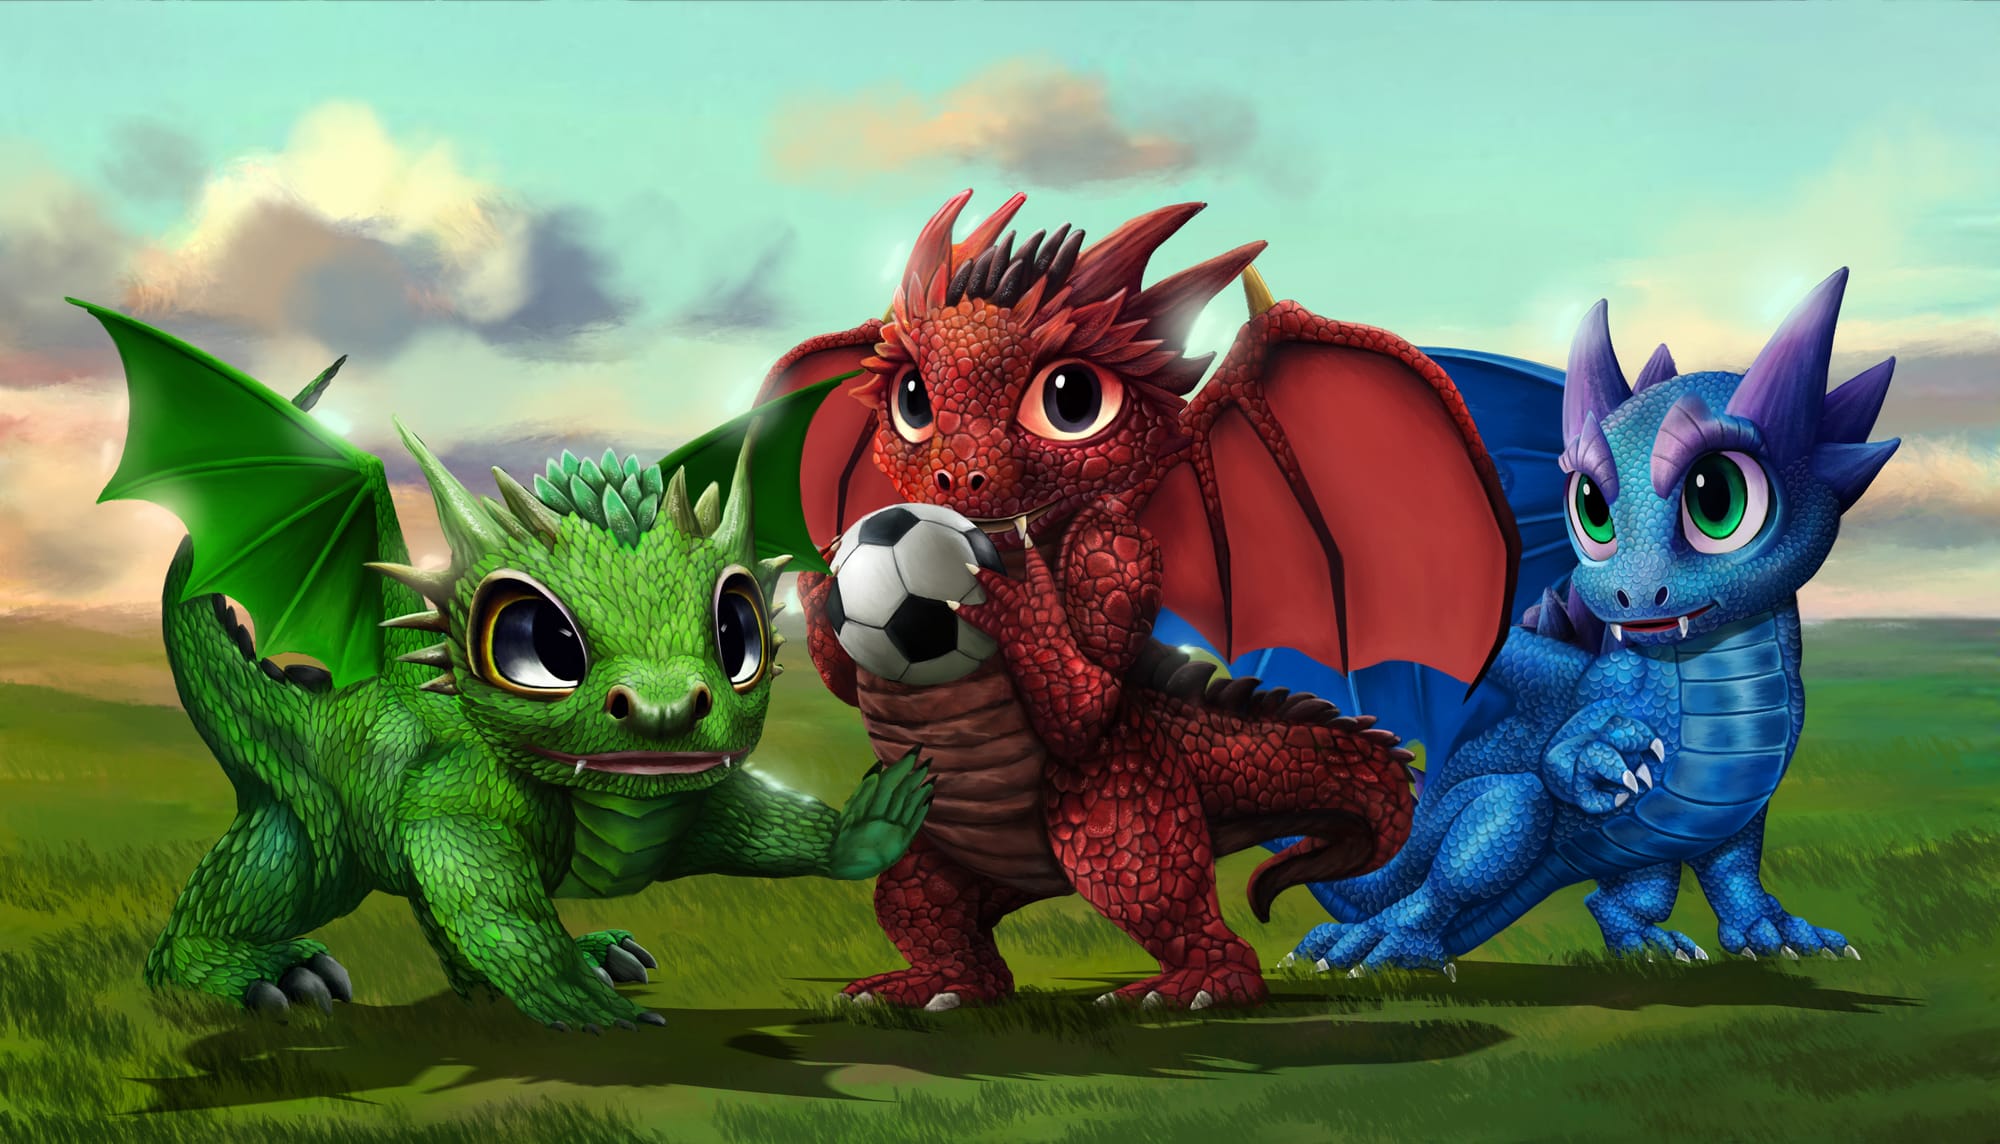 The Baby Dragons of Azar